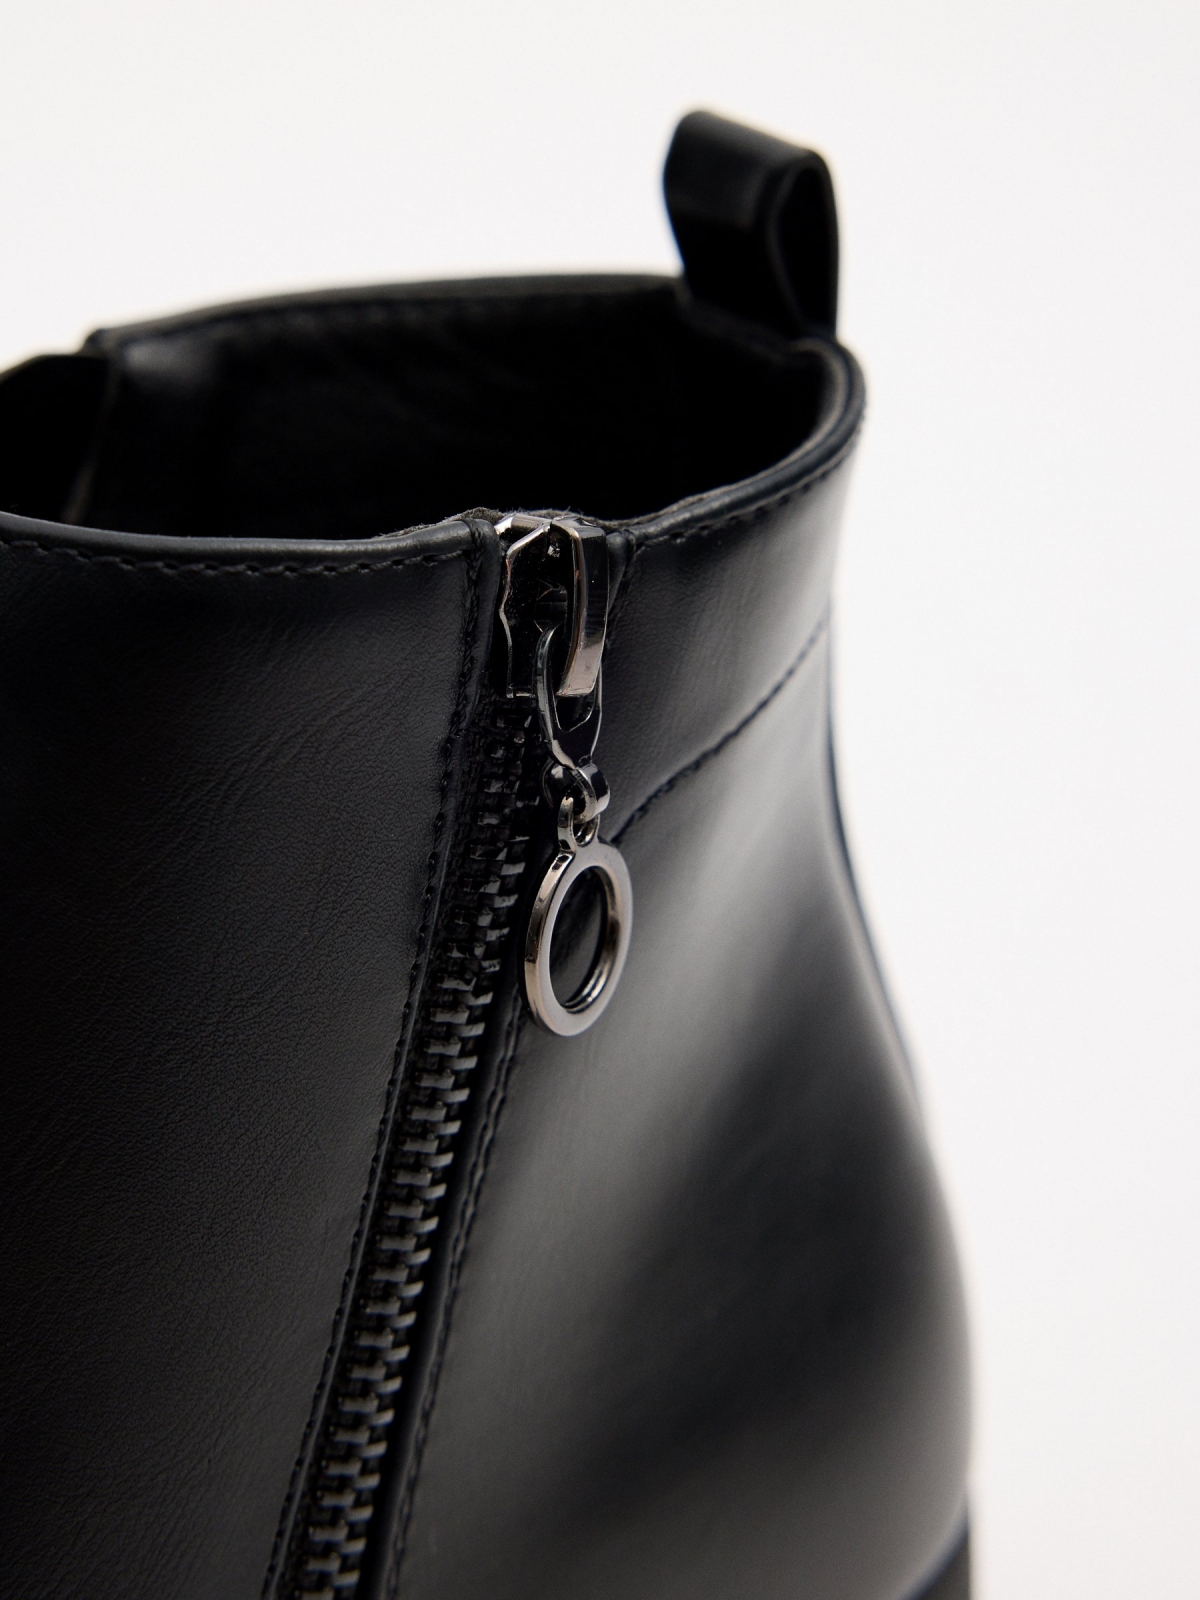 Zipper ankle boots detail view